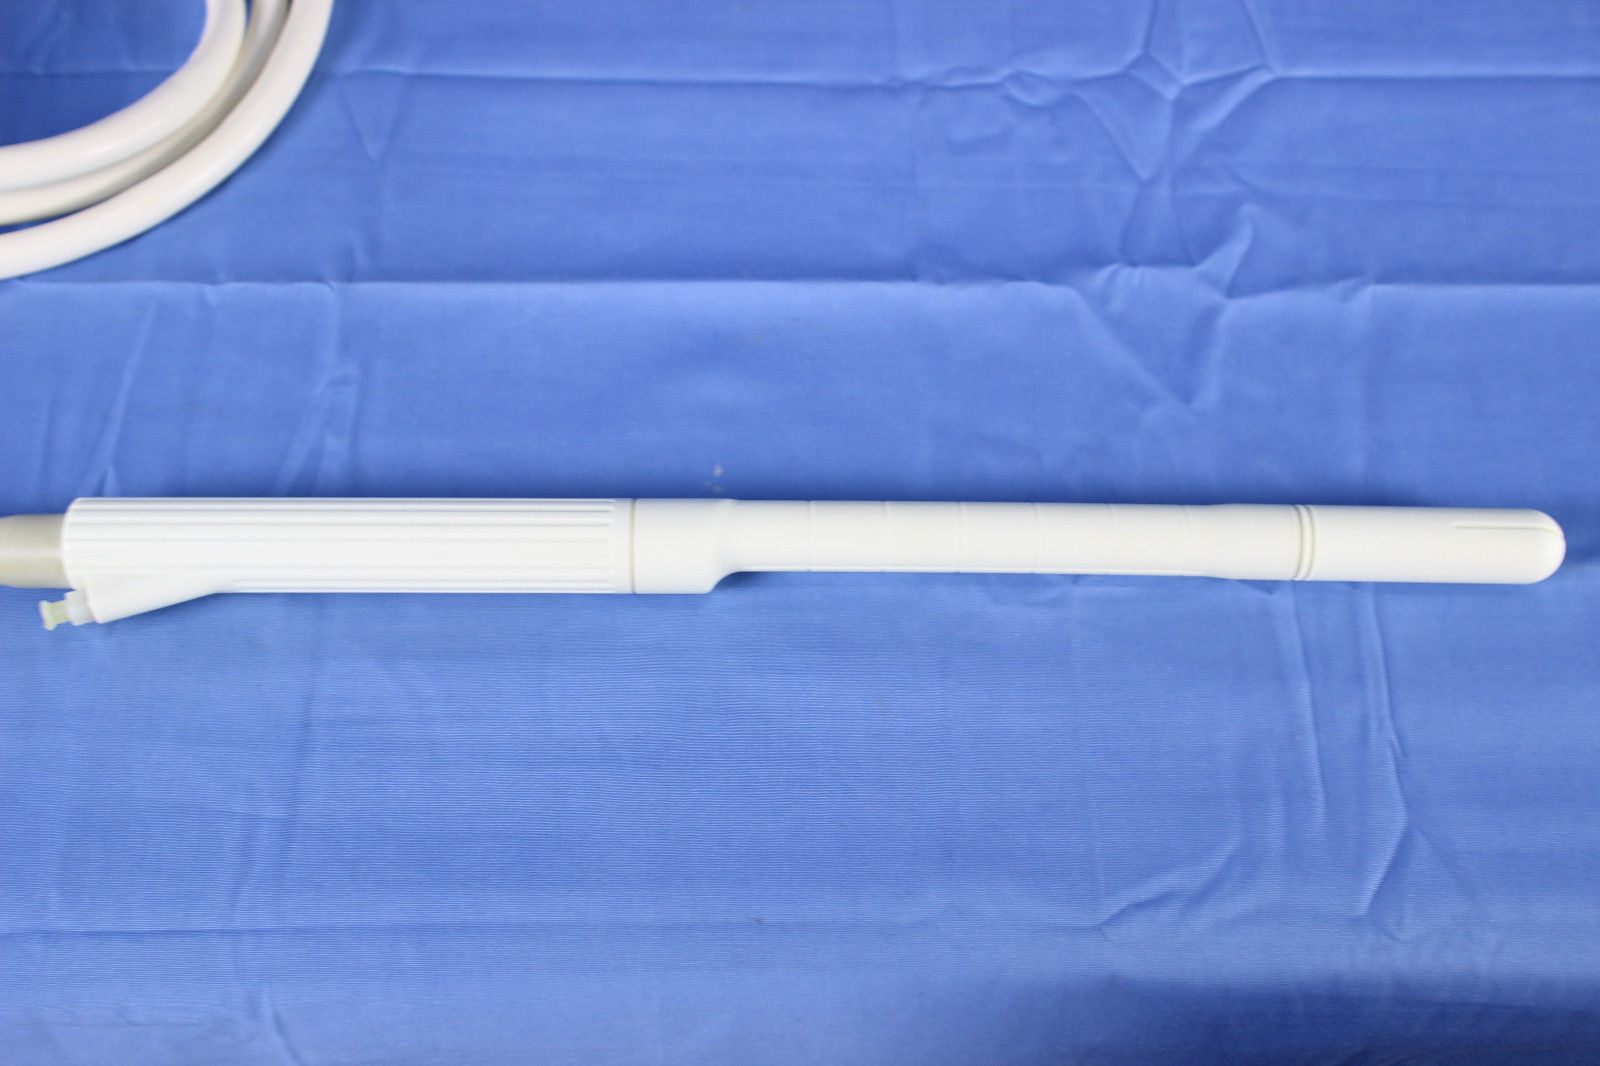 Acuson I7505 Ultrasound Transducer Probe with 30 Day Warranty DIAGNOSTIC ULTRASOUND MACHINES FOR SALE